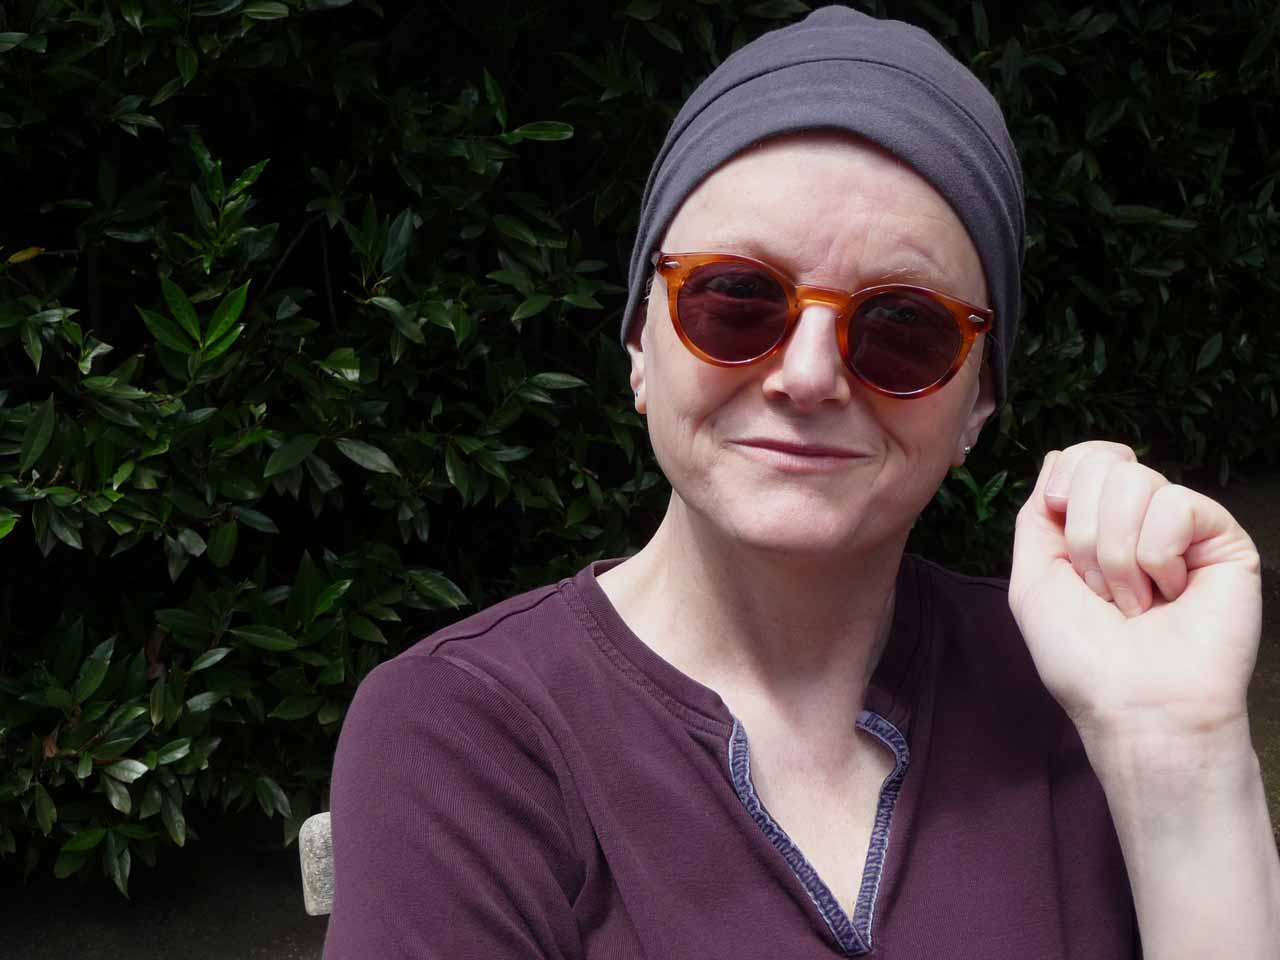 A woman wearing sunglasses and a chemo patient's skullcap in front of a hedgerow looking at the camera.